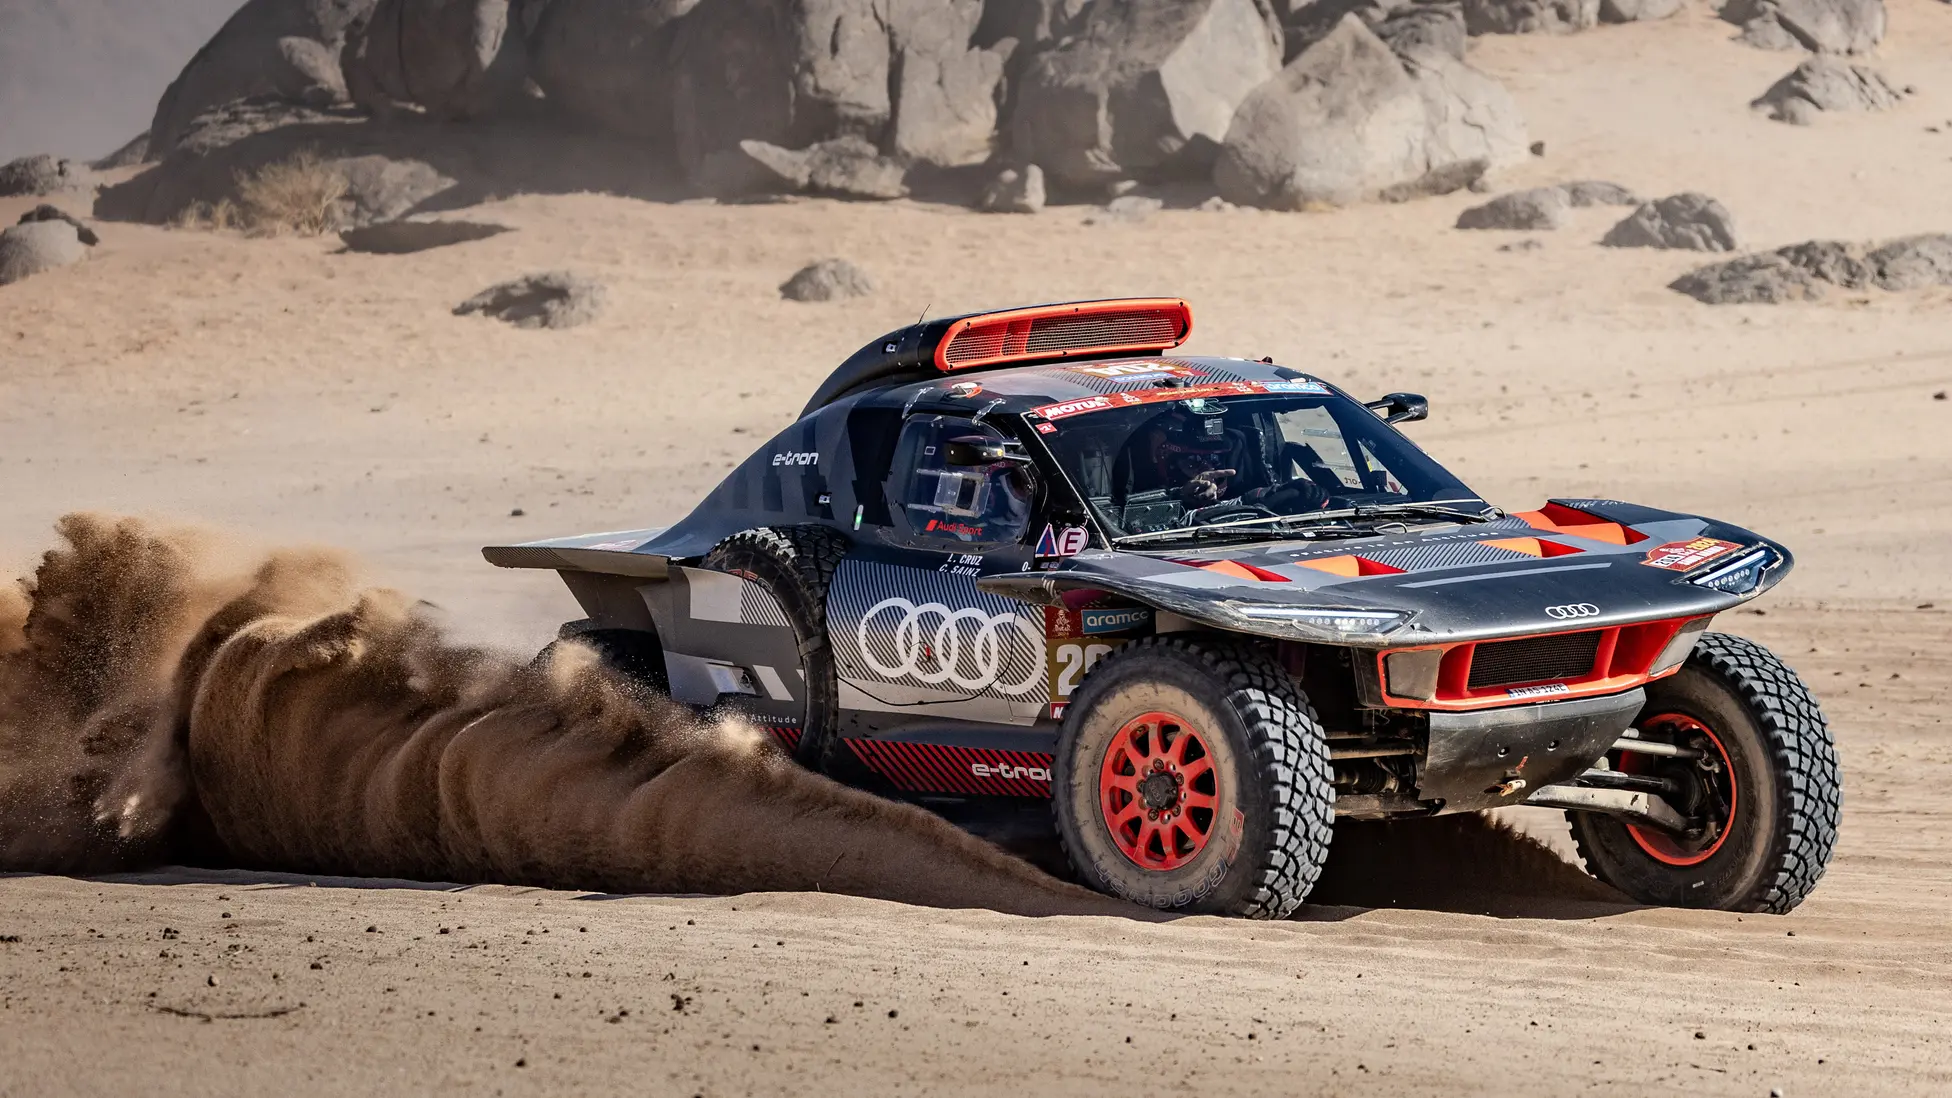 Audi and Sainz Sr. Conquer Sand Dunes in Historic Rally Win